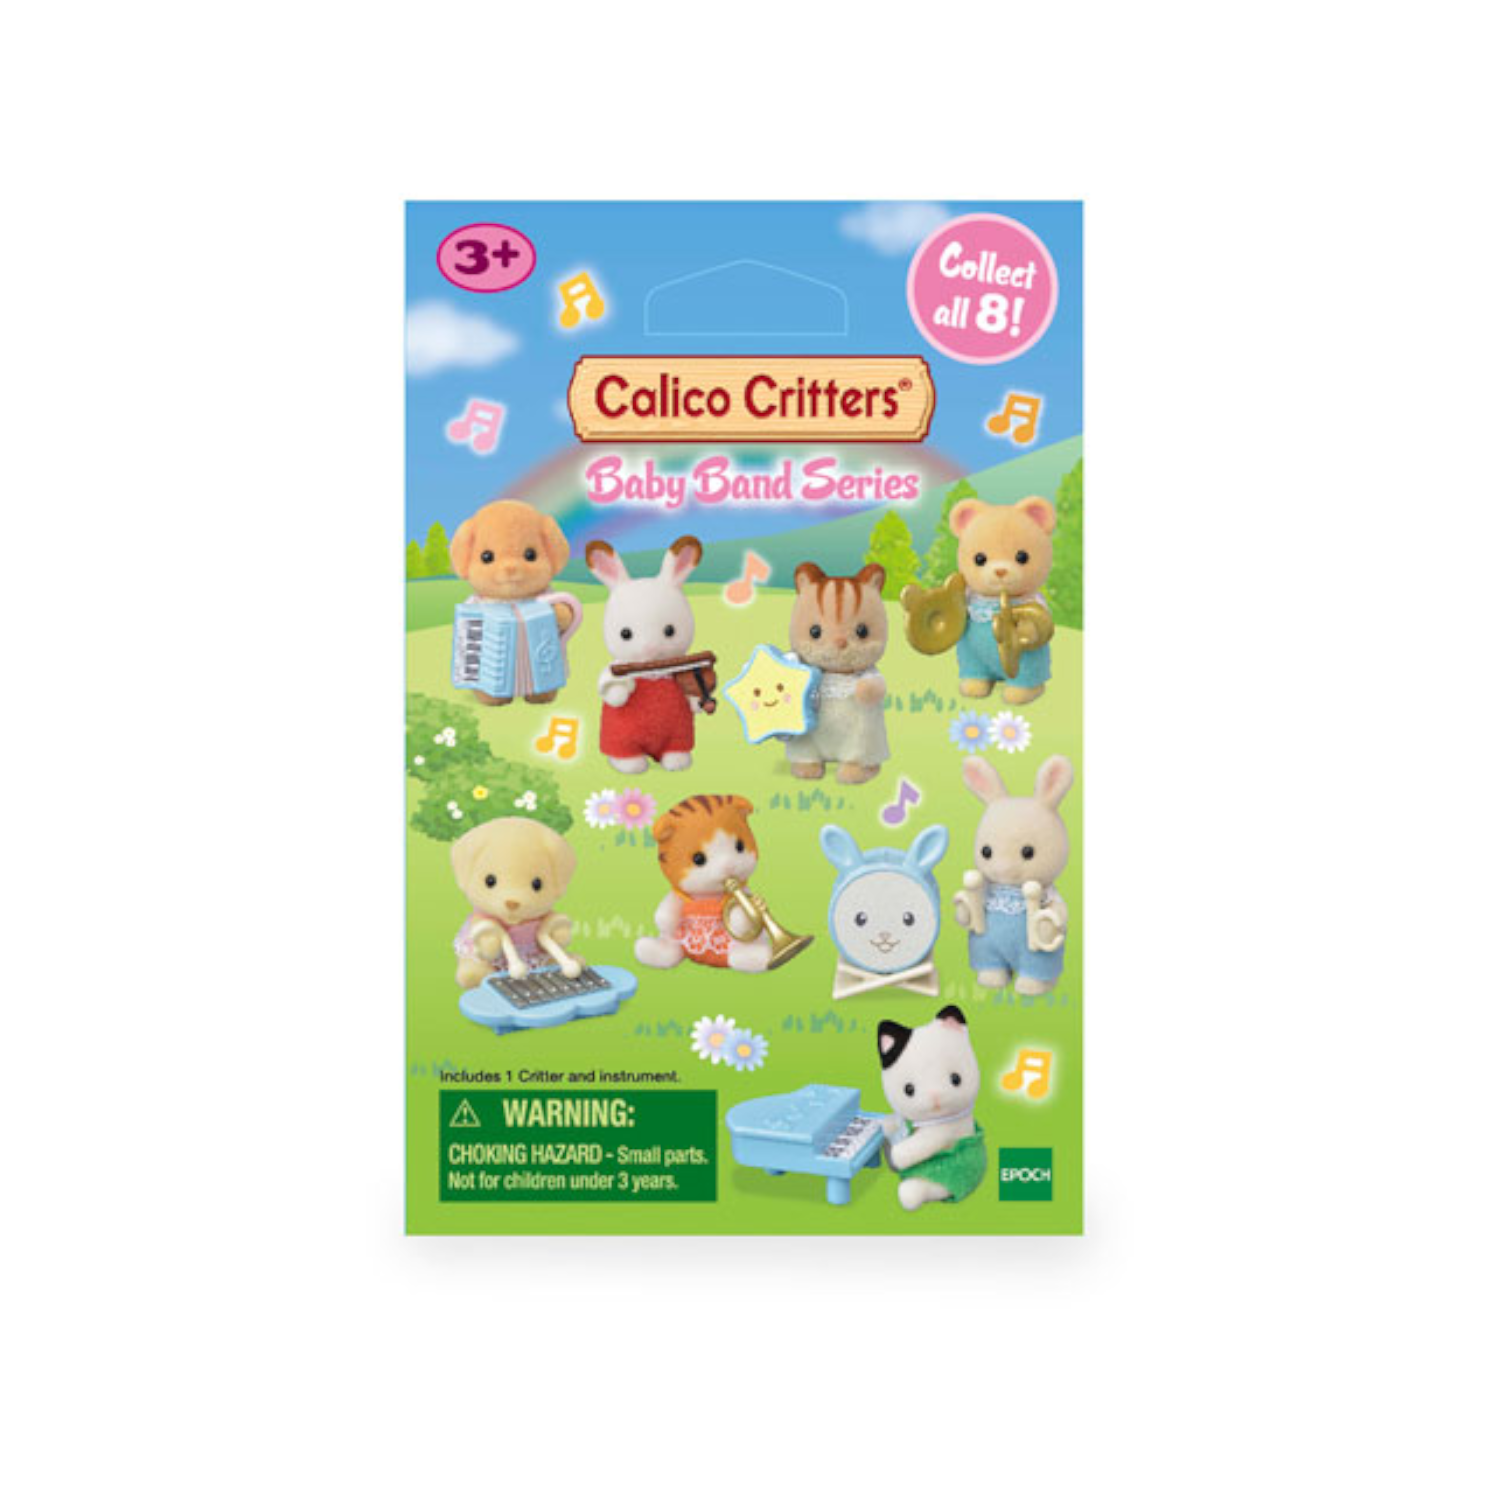 Calico Critters Baby Band Series 2018 Blind Bag Brand New Sealed Mystery Animal 